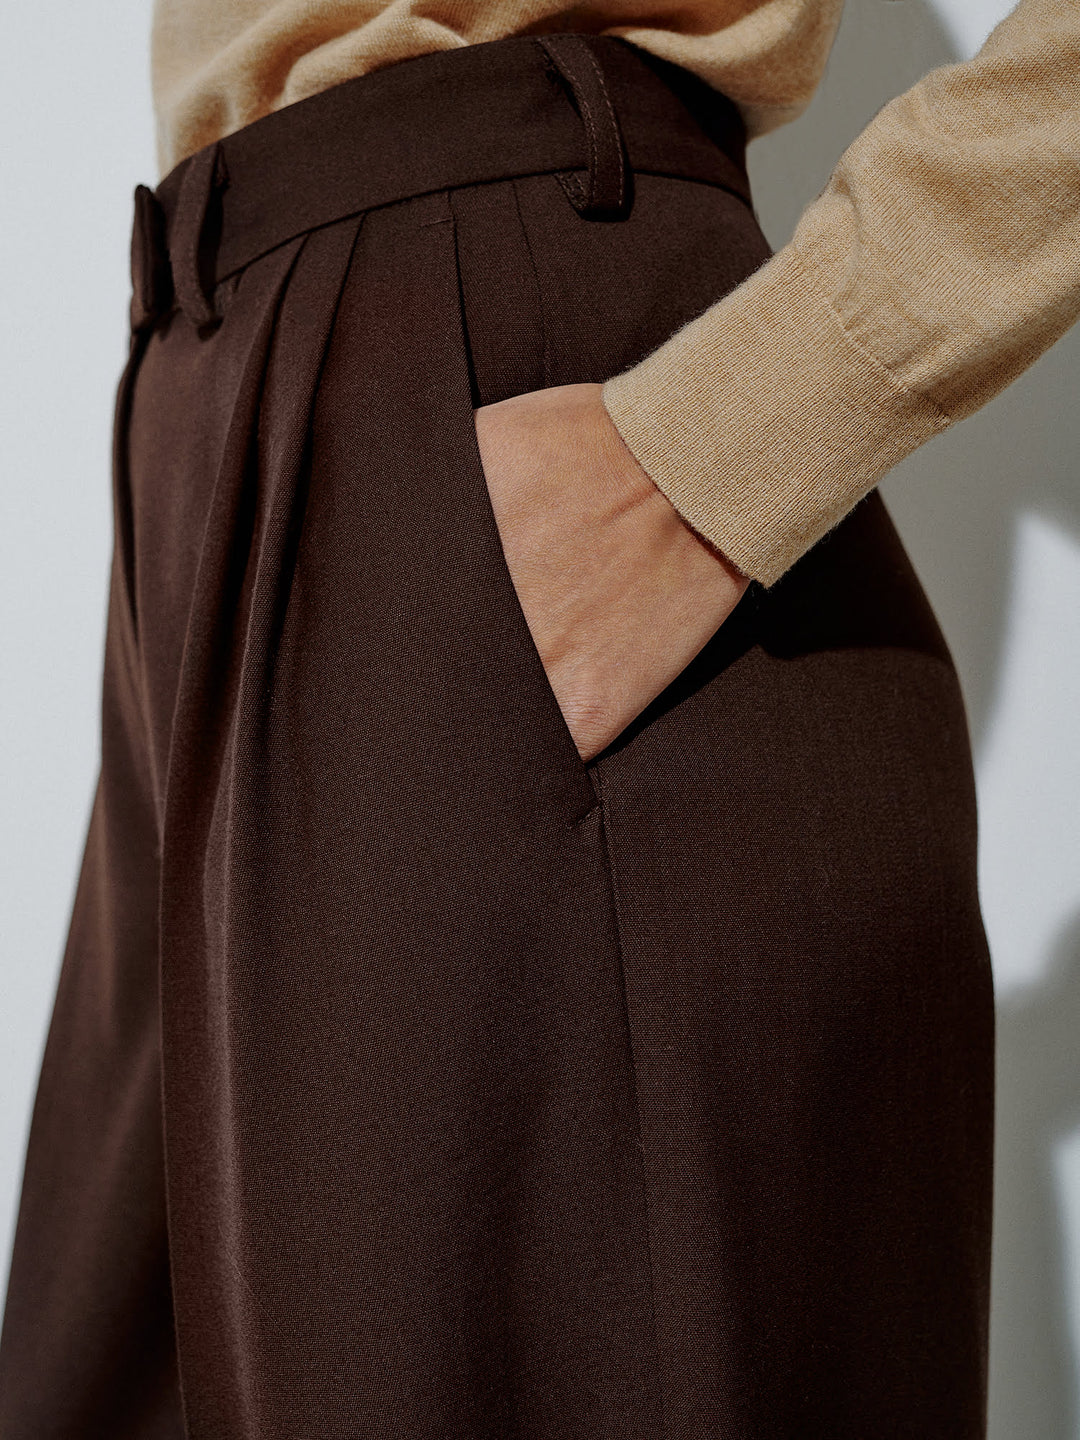 Margaret wool and viscose pants (chocolate)